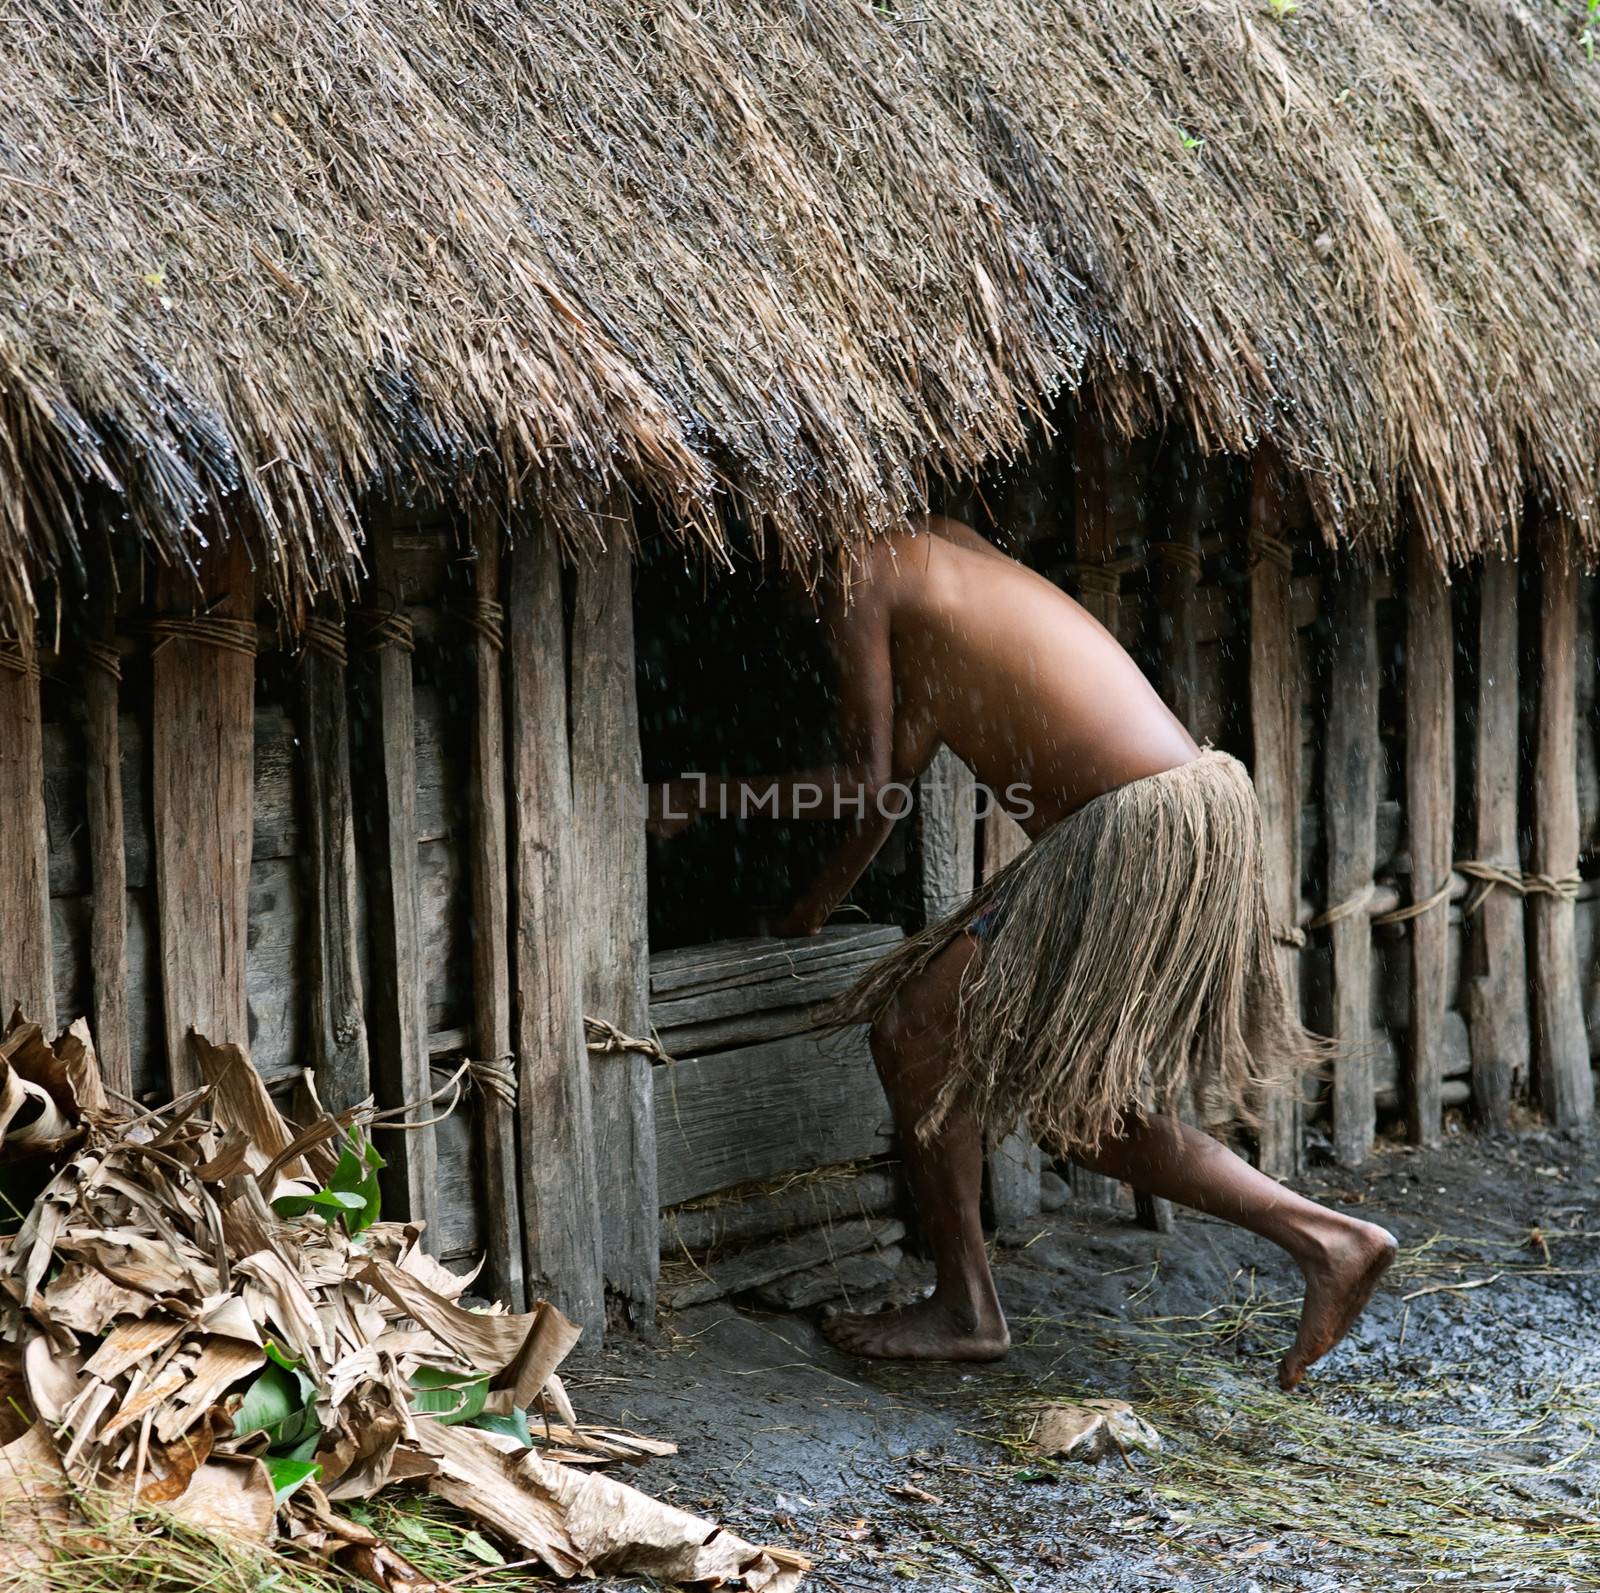 WAMENA, PAPUA, INDONESIA - JUNE, 20: The woman in a traditional skirt hides in a hut. Traditional huts Papuans.  June, 20, 2012 near Wamena, Papua, Indonesia. 